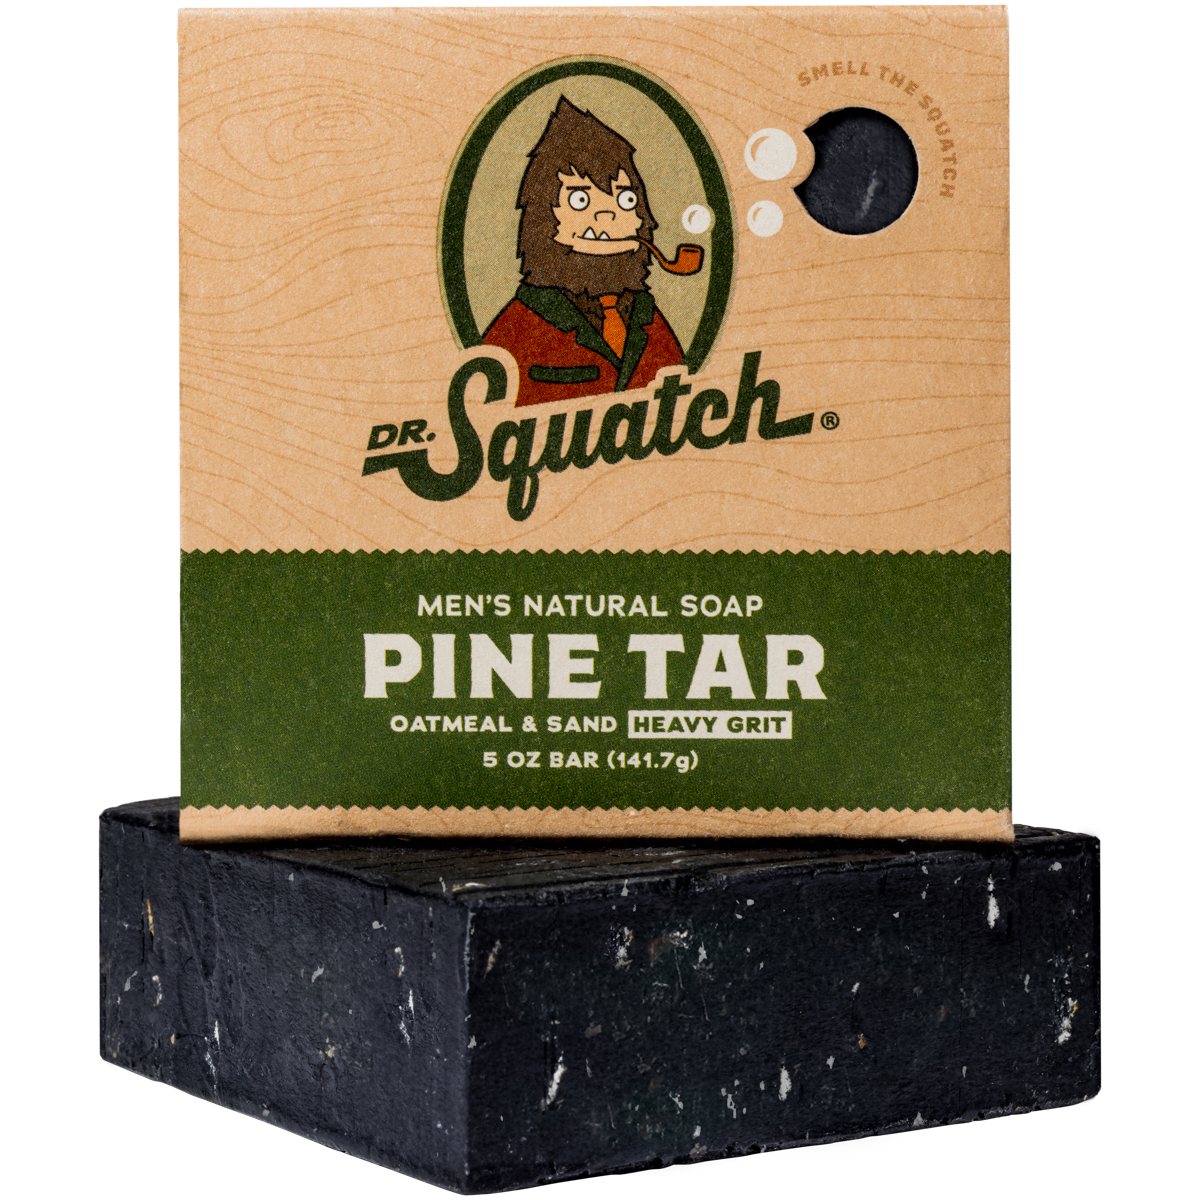 THE FINAL COUNTDOWN - Dr. Squatch Soap Co